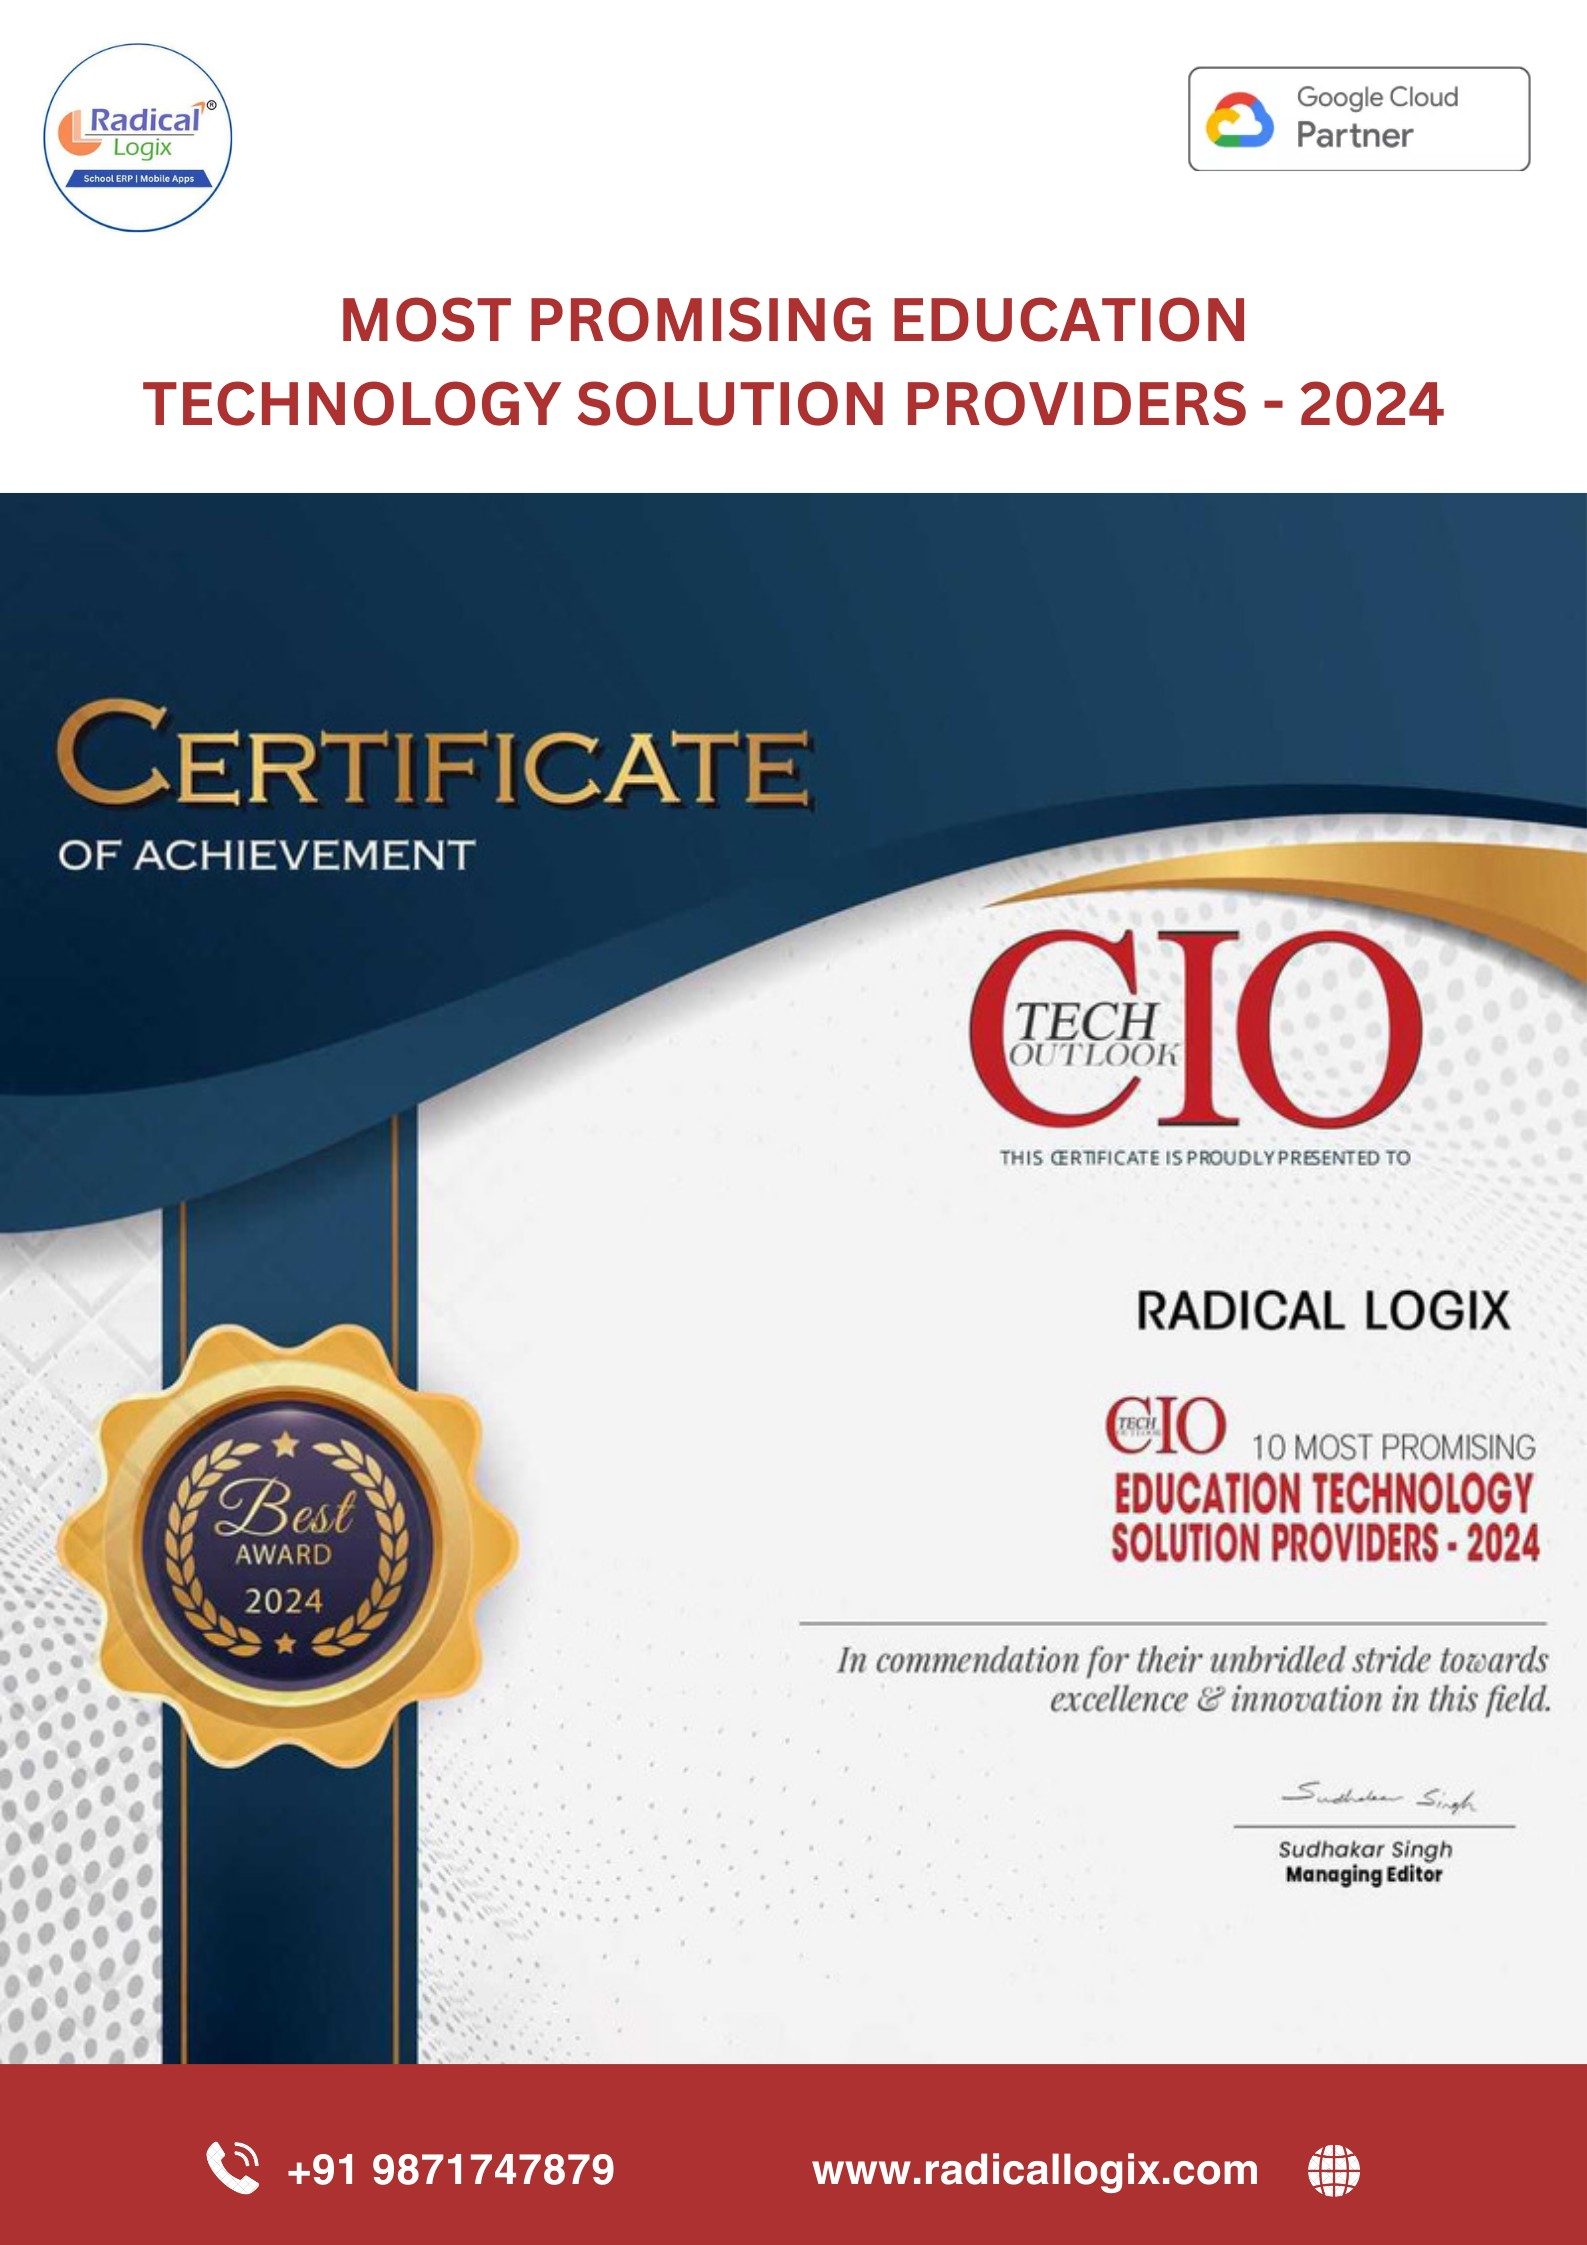 Radical Logix - Most Promising Education Technology Solution Providers of 2024